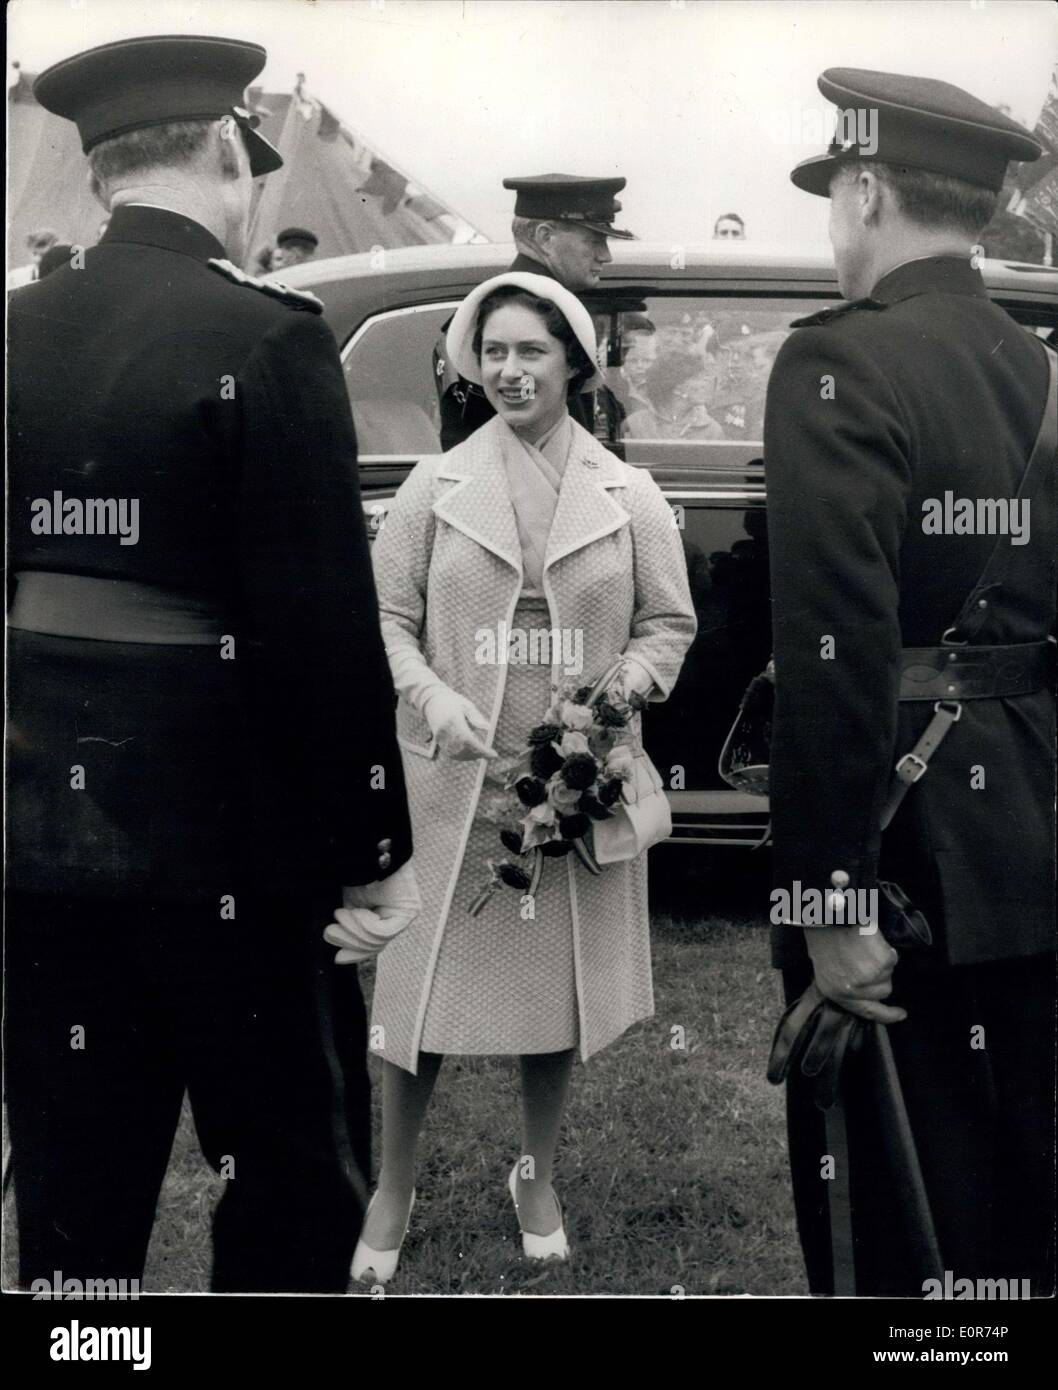 Jun. 09, 1958 - Princess Margaret Visits The 4th Battalion The Suffolk Regiment (T.A.). Photo shows H.R.H. Princess Margaret pictured when she arrived for the visit to the 4the Battalion the Suffolk Regiment (T.A.), of which she is Colone-in-Chief, in the grounds of Benacre Hall, Wrentham, Suffolk yesterday. Stock Photo